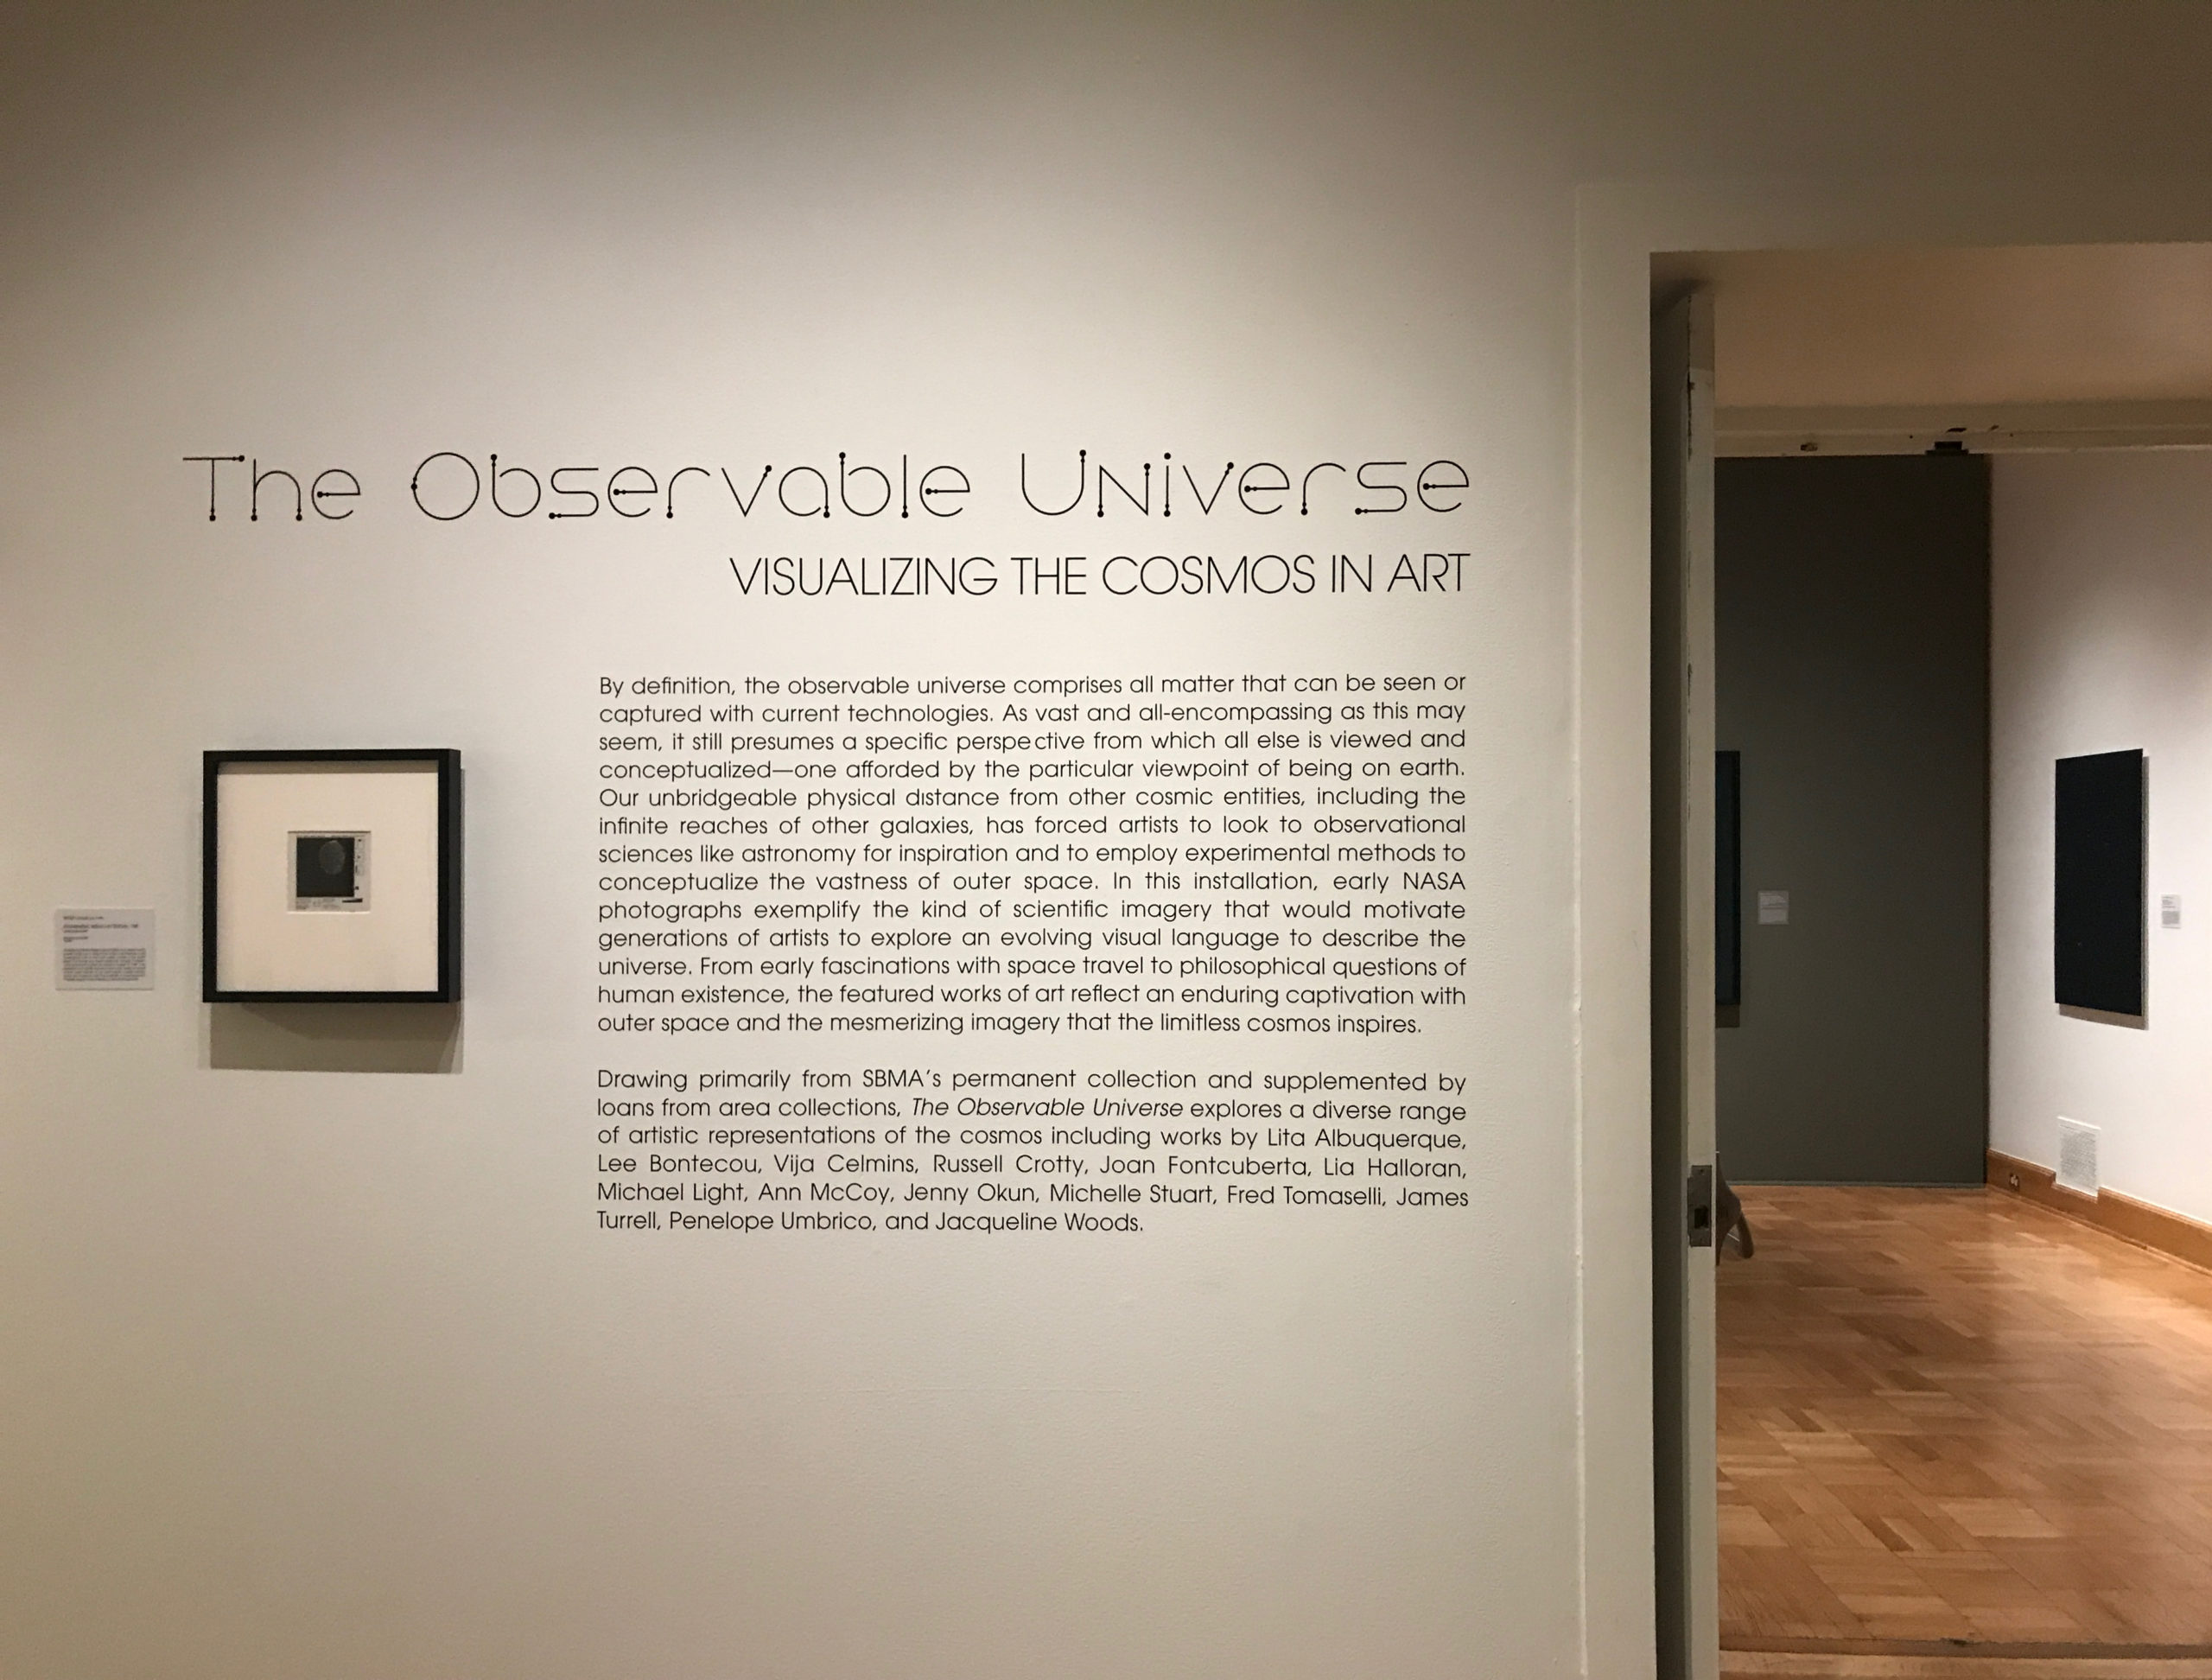 An example of vinyl Signage designed for the Santa Barbara Museum of Art's The Observable Universe exhibition